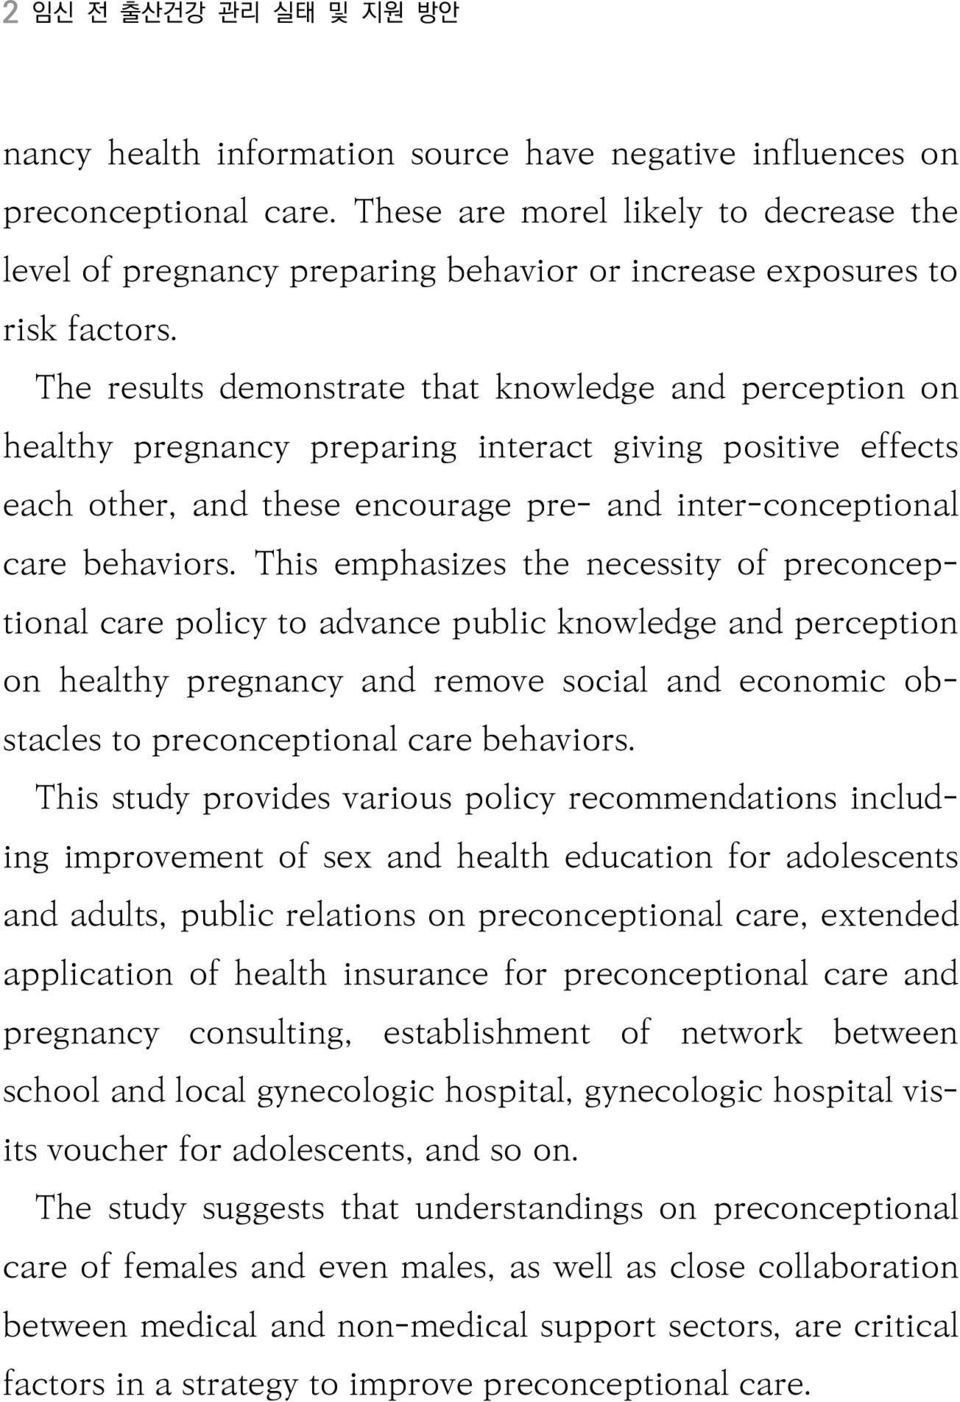 The results demonstrate that knowledge and perception on healthy pregnancy preparing interact giving positive effects each other, and these encourage pre- and inter-conceptional care behaviors.